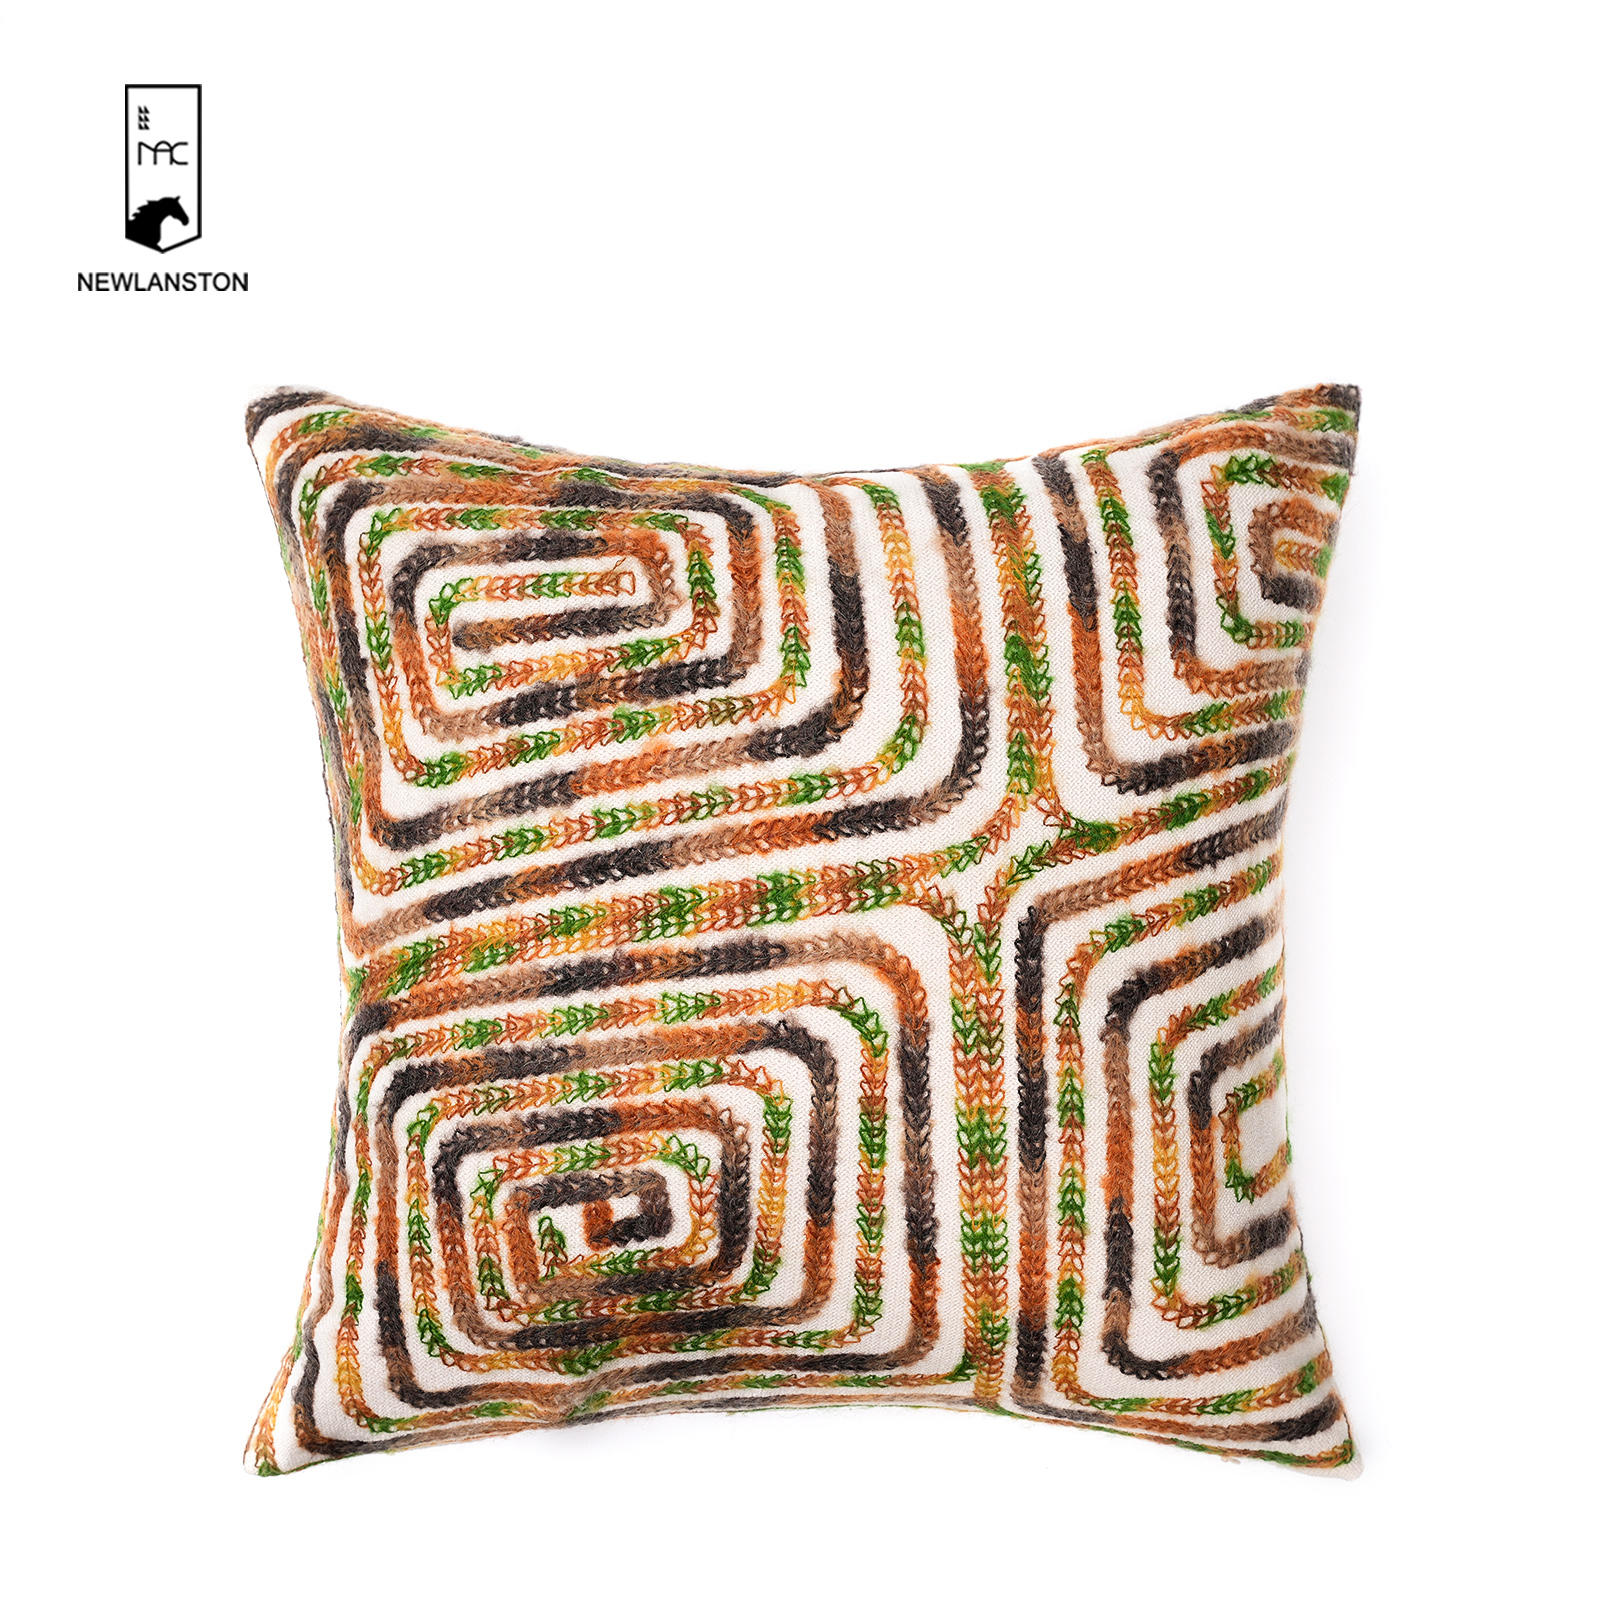 45x45 Embroidery cotton Geometric style Cushion cover 